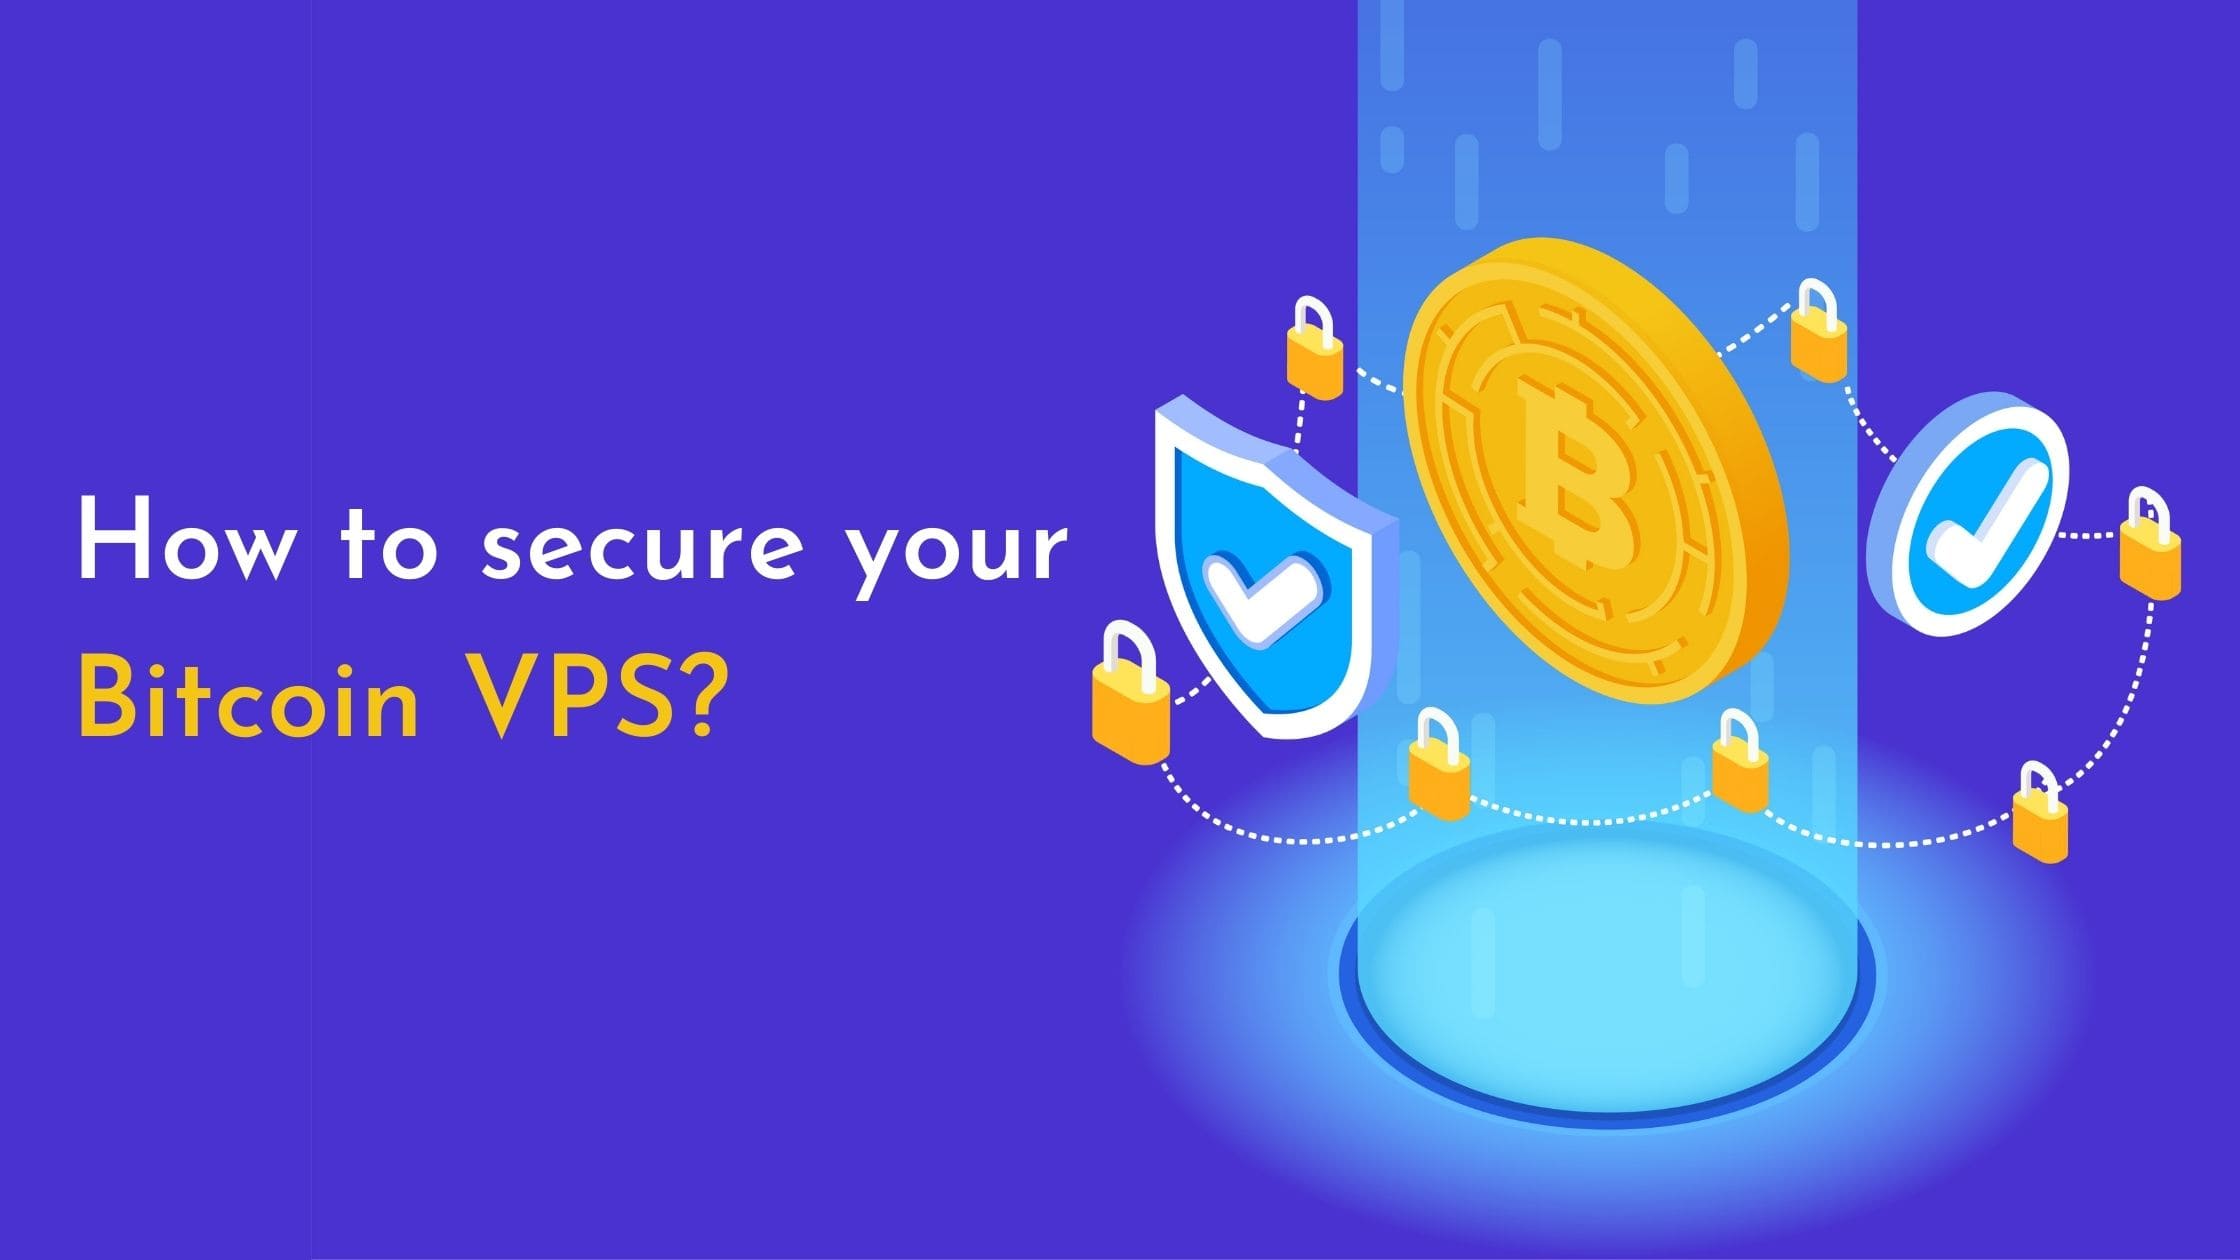 How to secure your Bitcoin VPS?